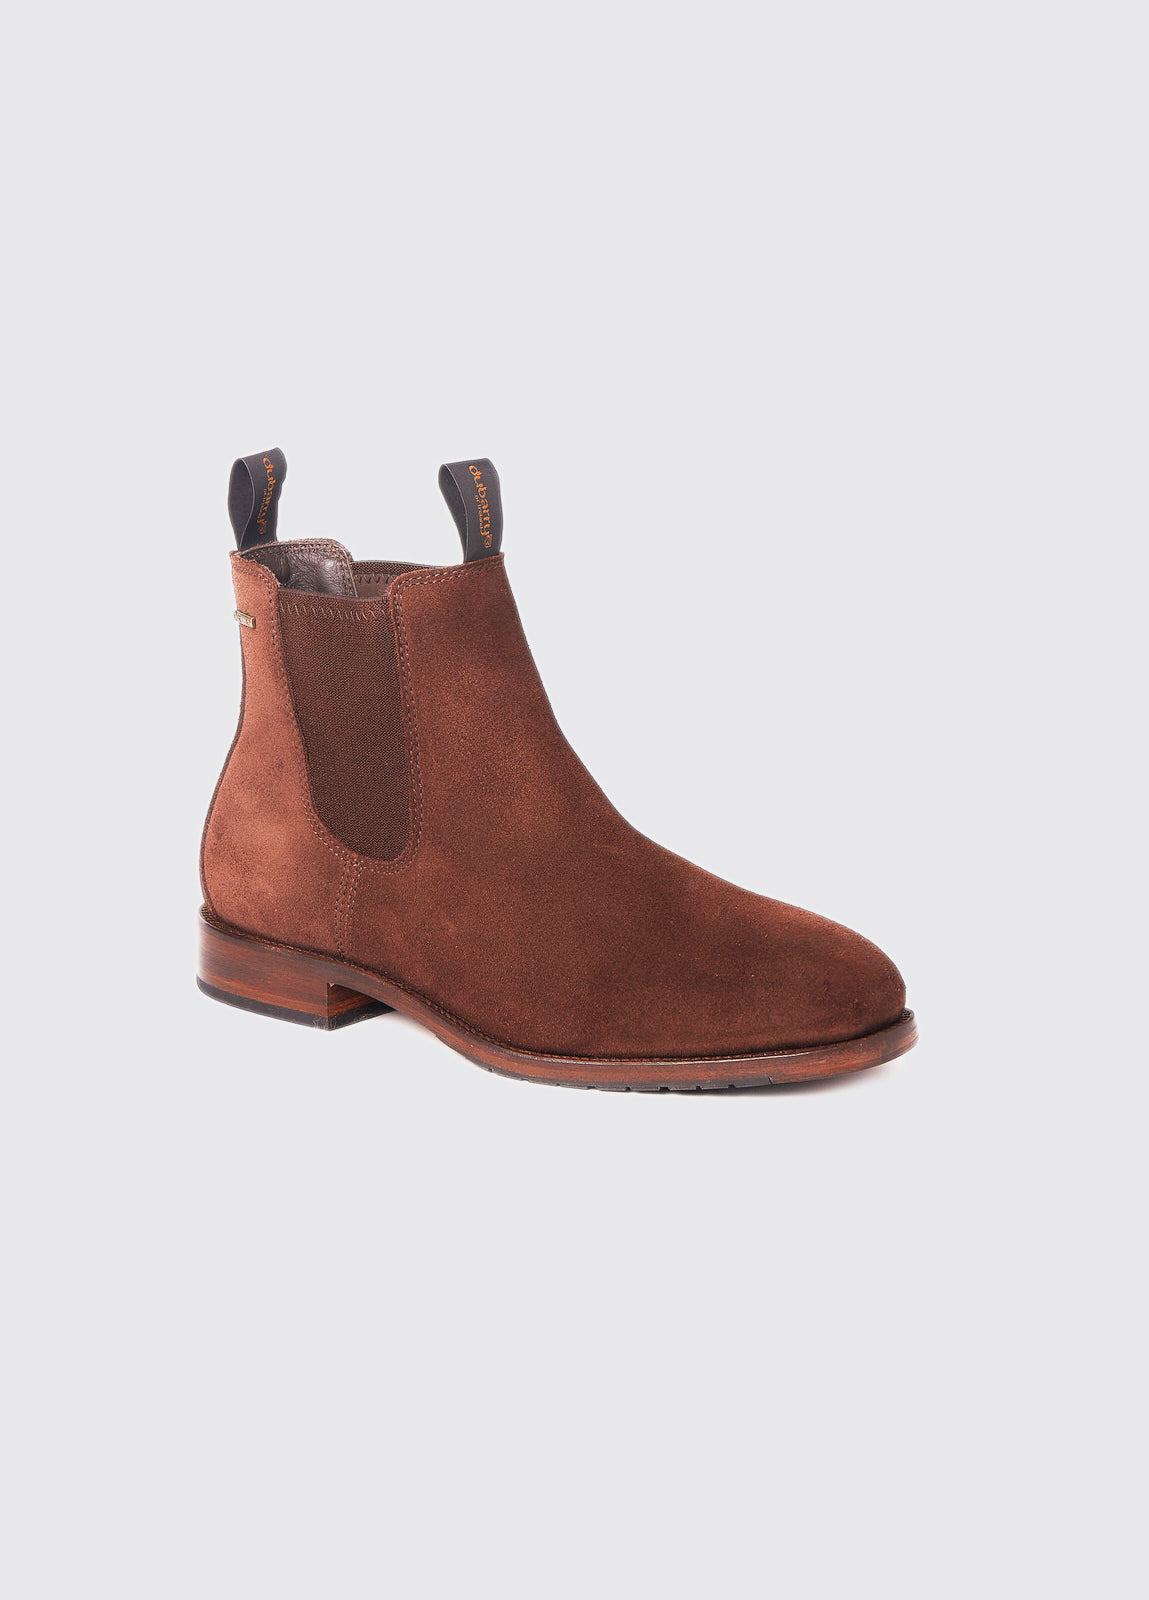 Kerry Leather Soled Boot - Cigar